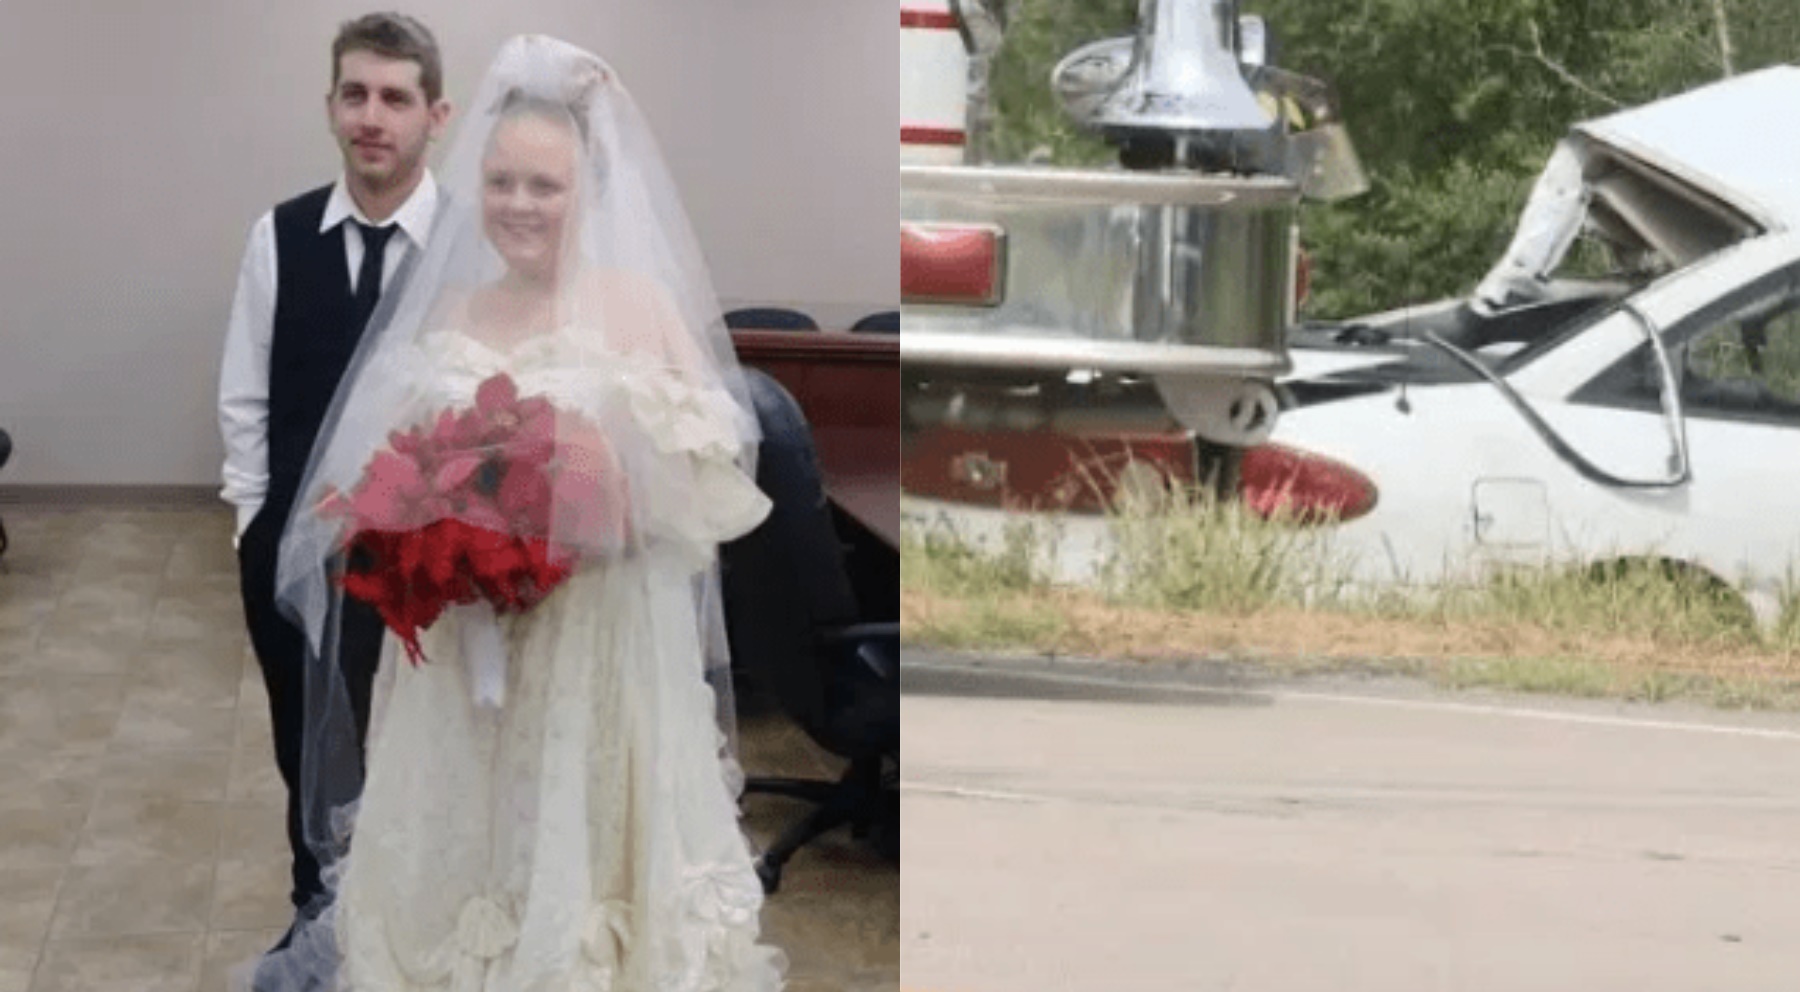 Childhood lovers die in accident only minutes after beautiful wedding ceremony